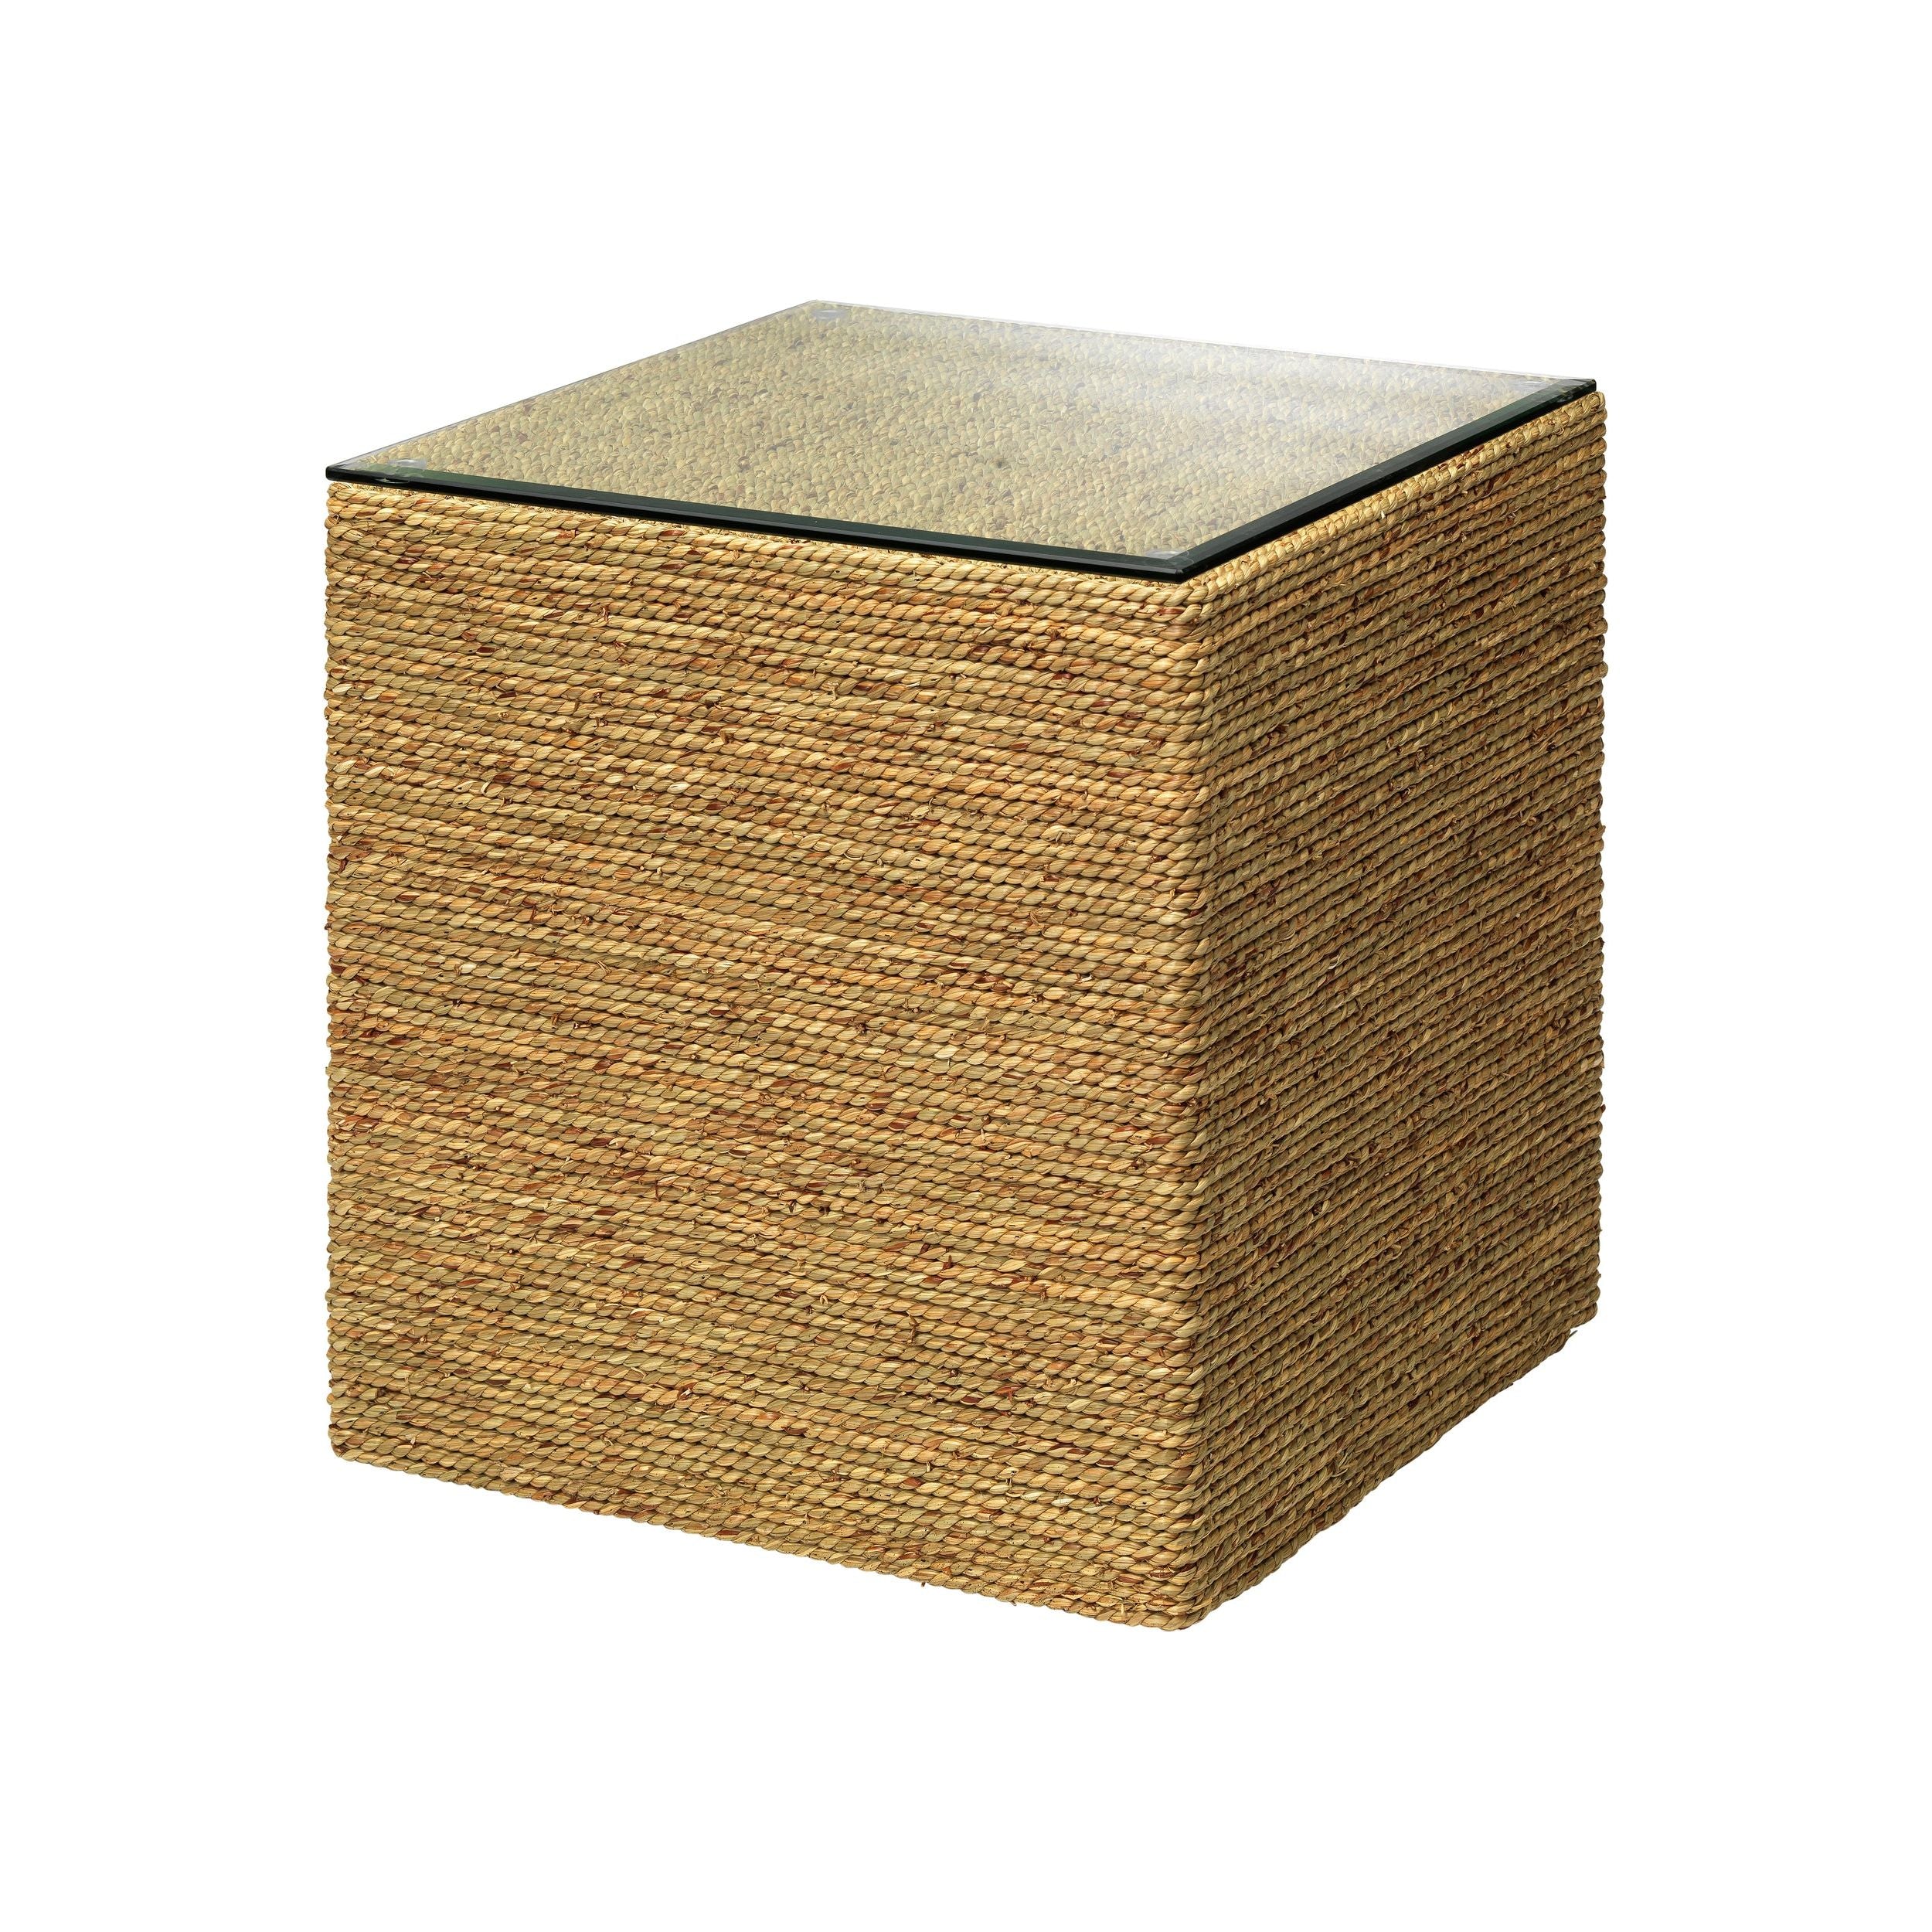 Jamie Young Company - 20CAPT-SQNA - Captain Square Side Table - Captain - Natural